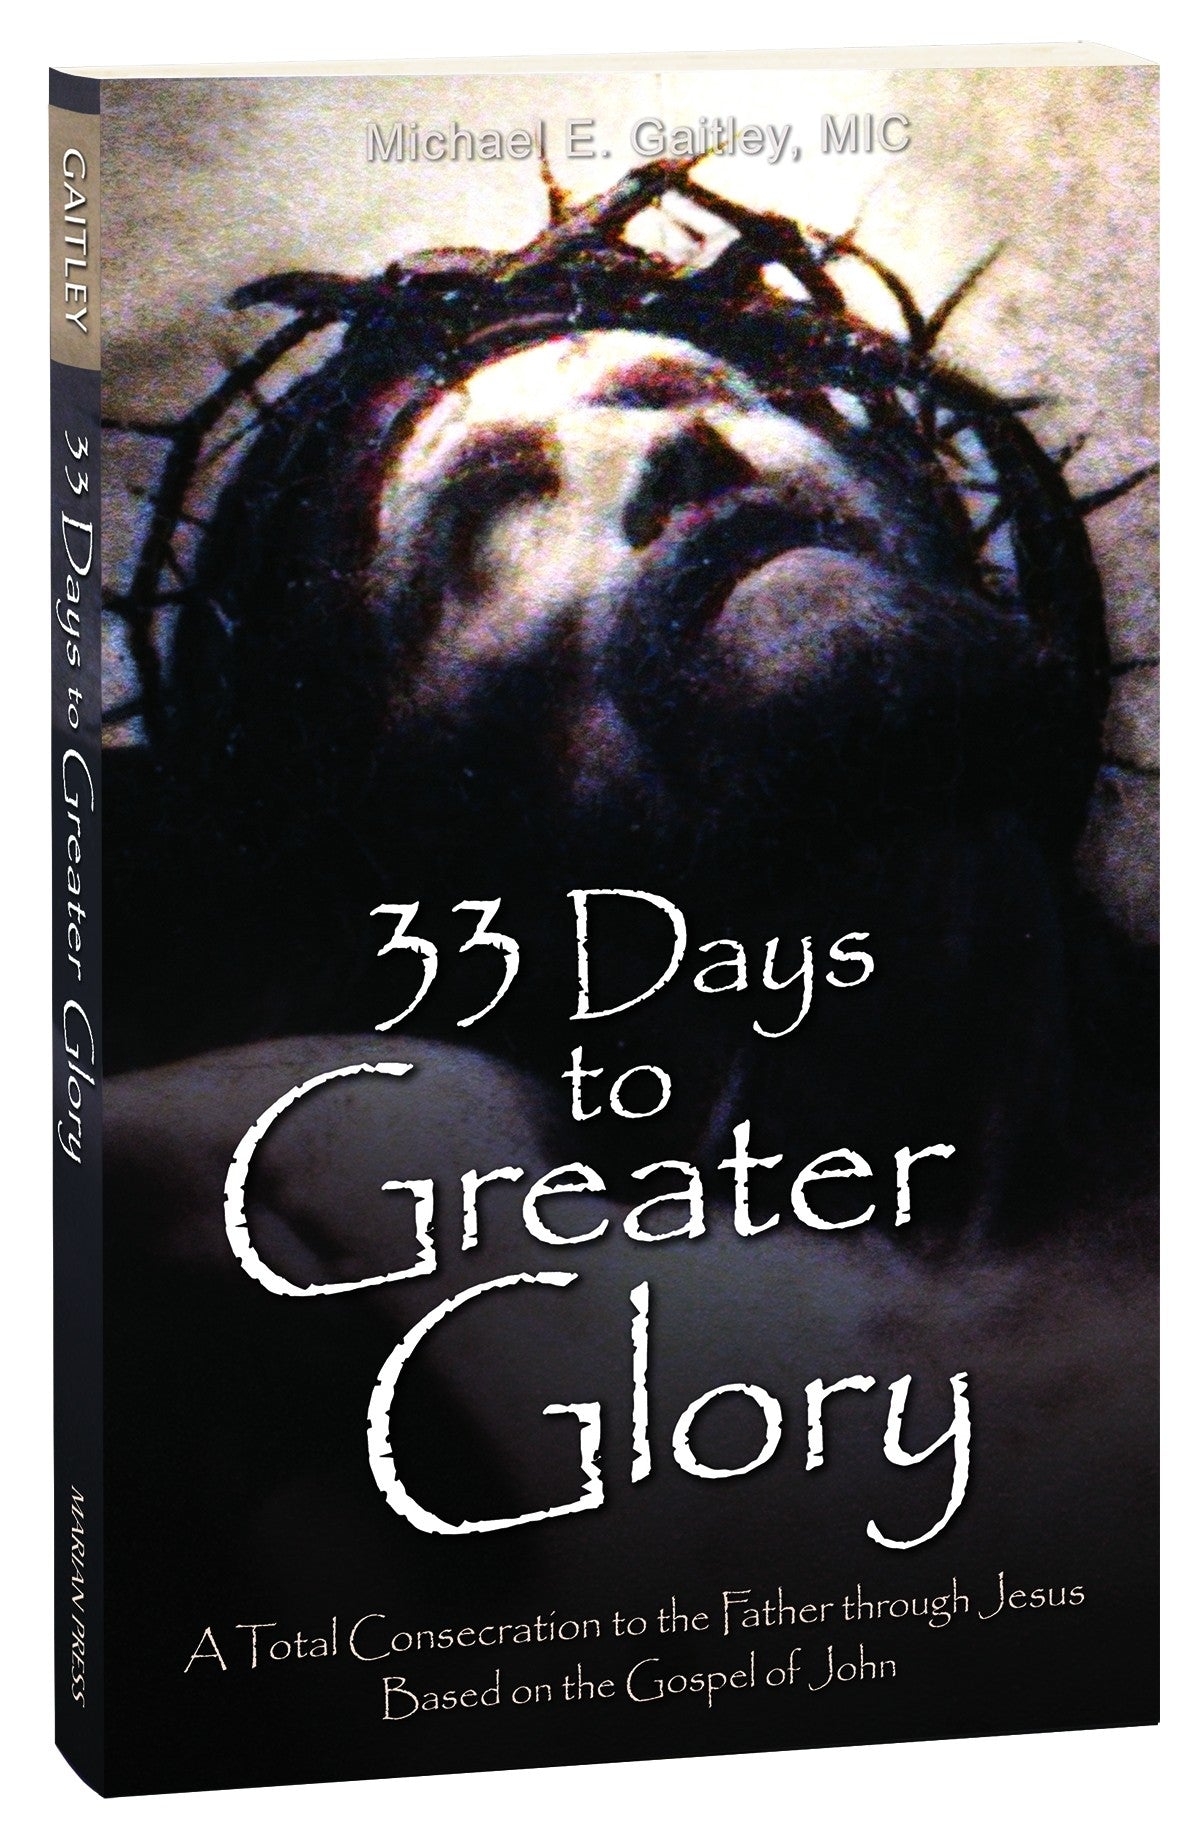 33 Days to Greater Glory: A Total Consecration to the Father through Jesus Based on the Gospel of John